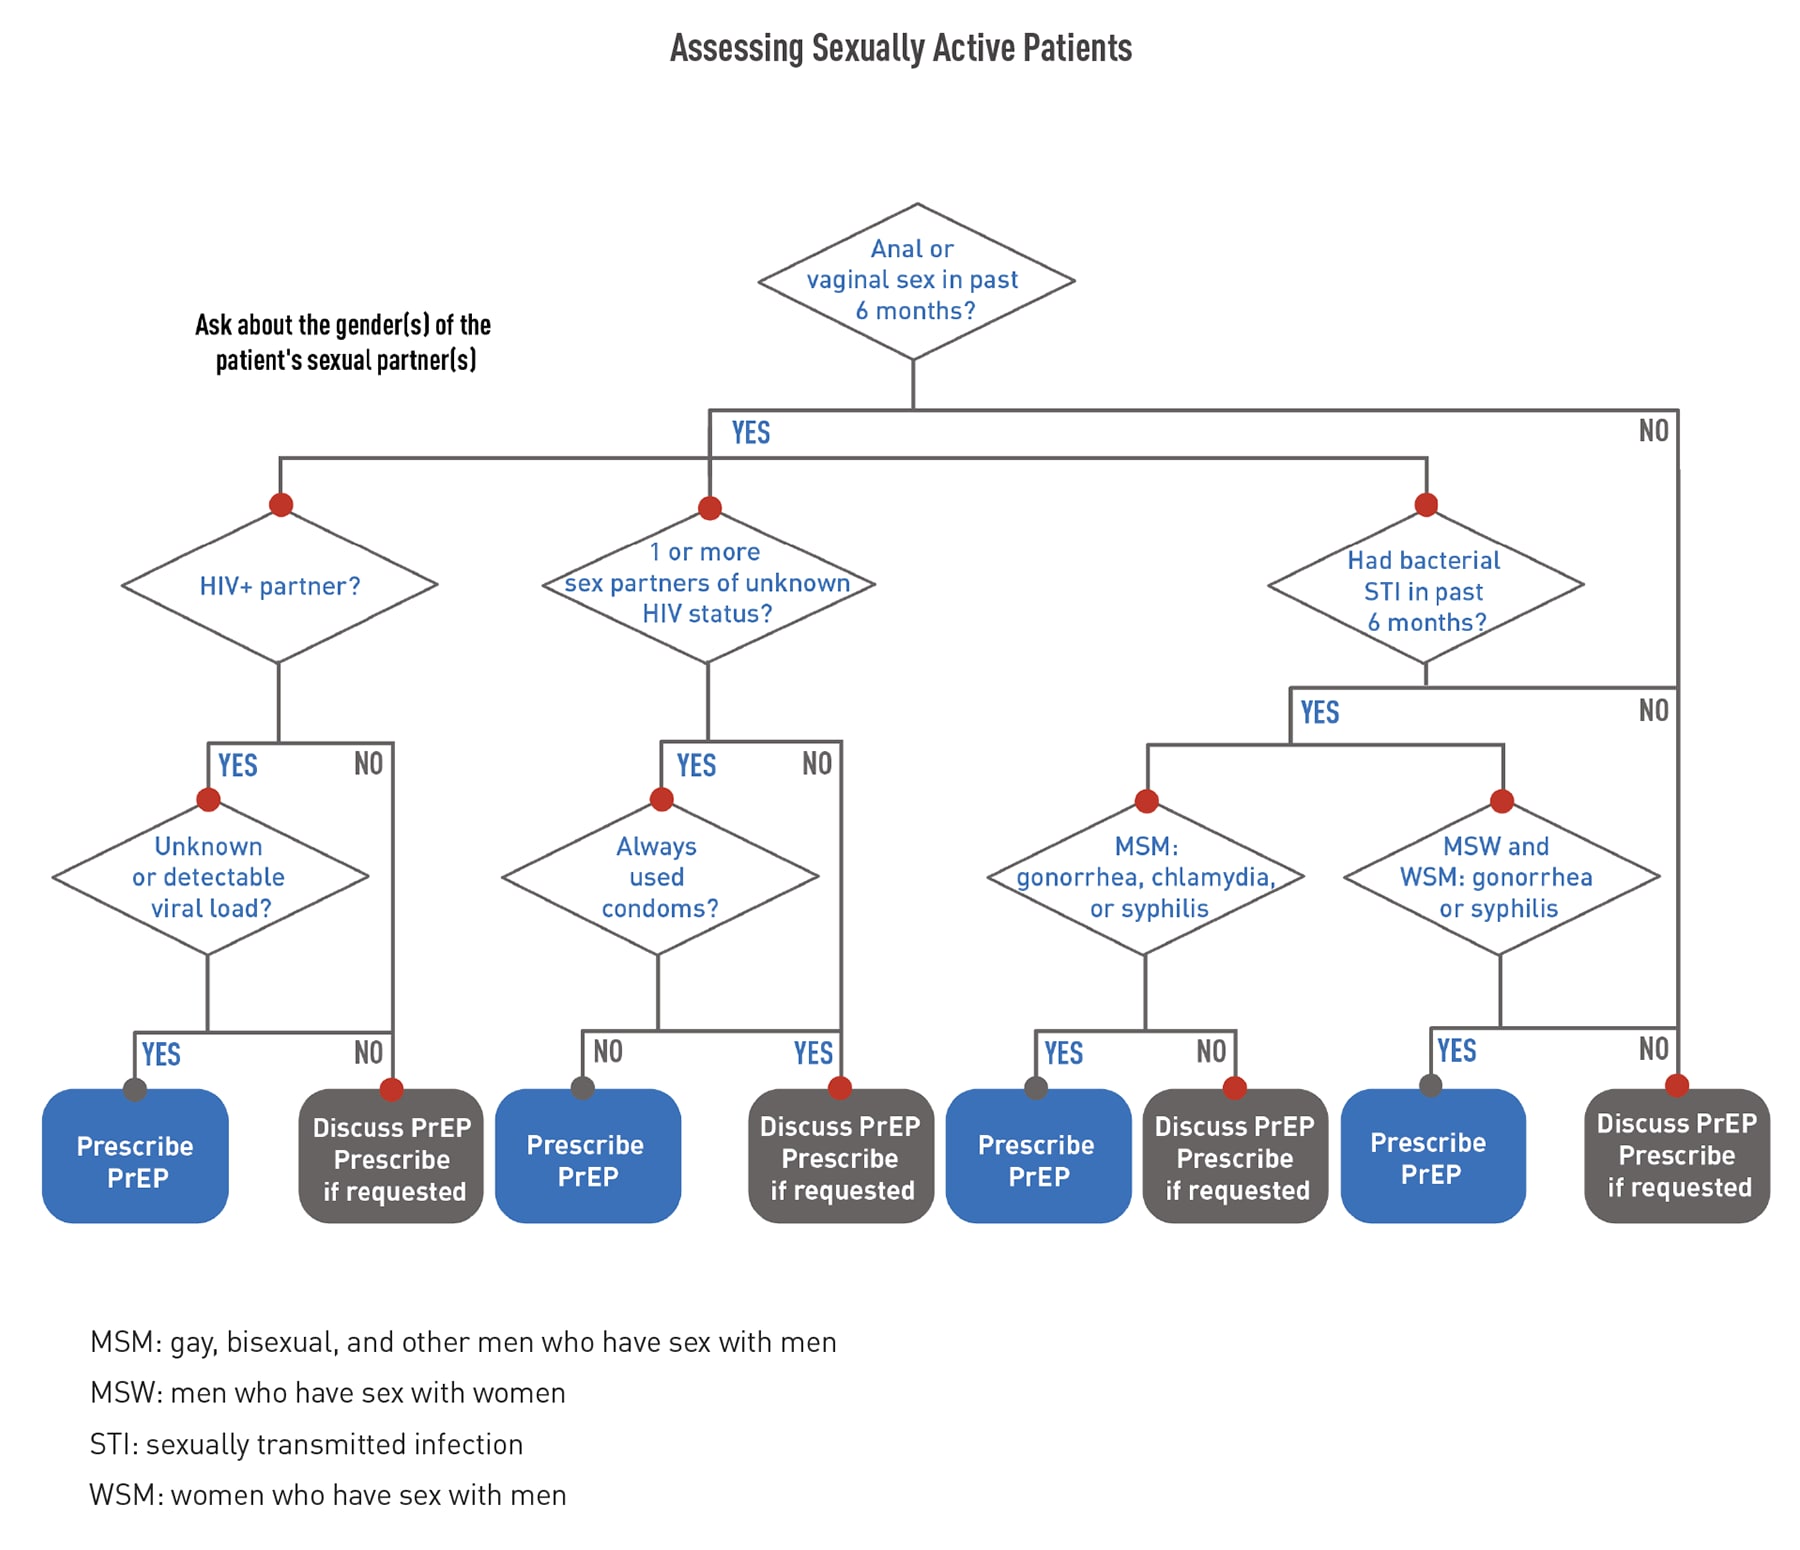 Assessing Sexually Active Patients (Flowchart)